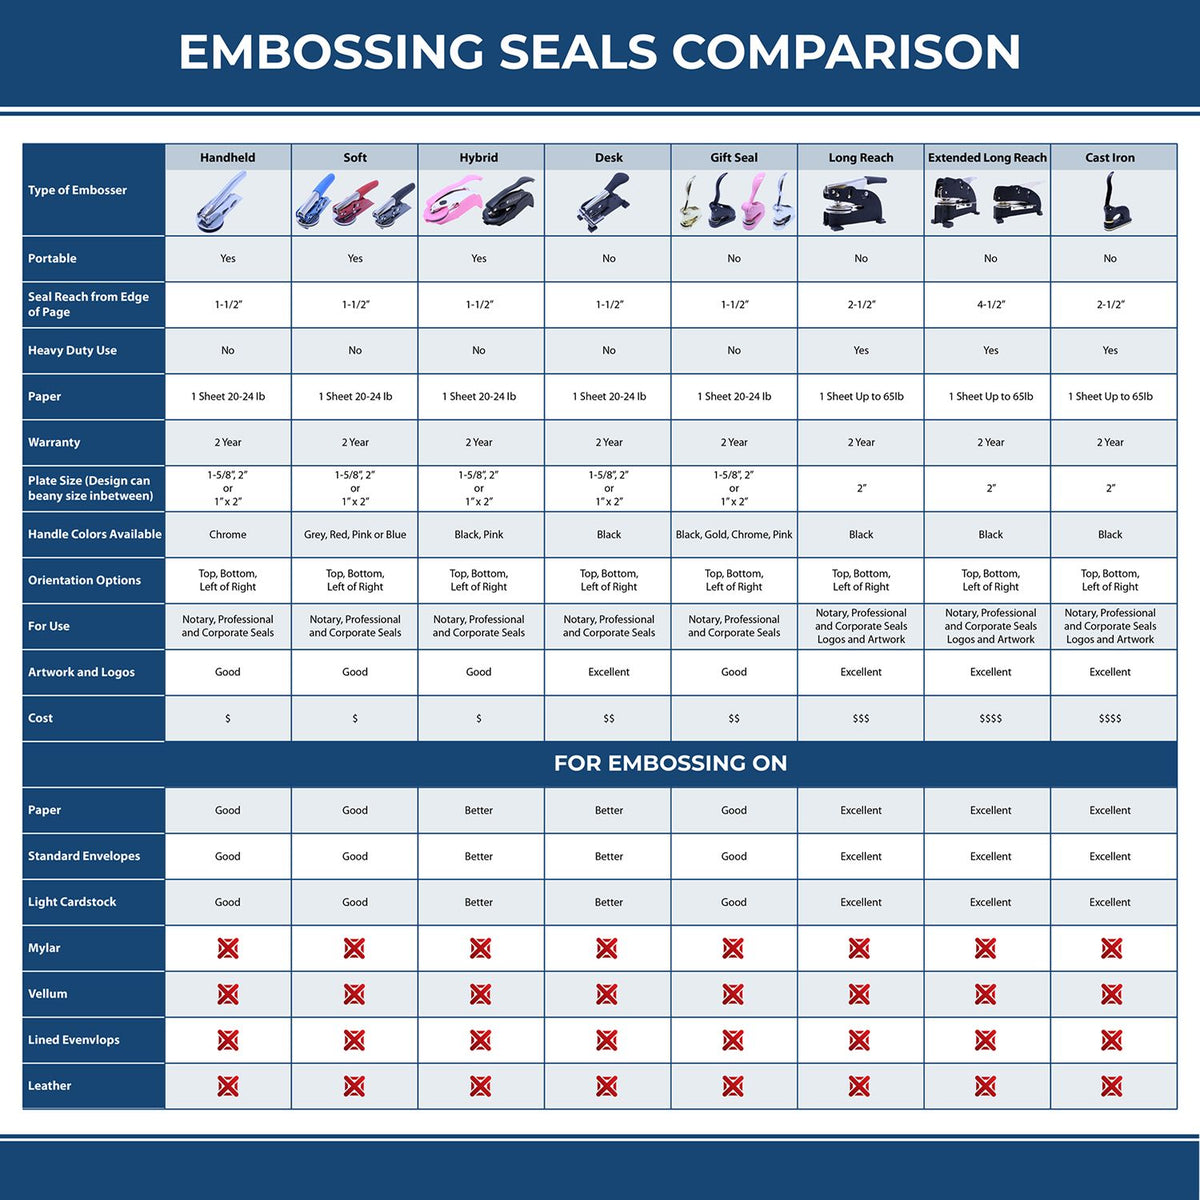 A comparison chart for the different types of mount models available for the Hybrid North Dakota Land Surveyor Seal